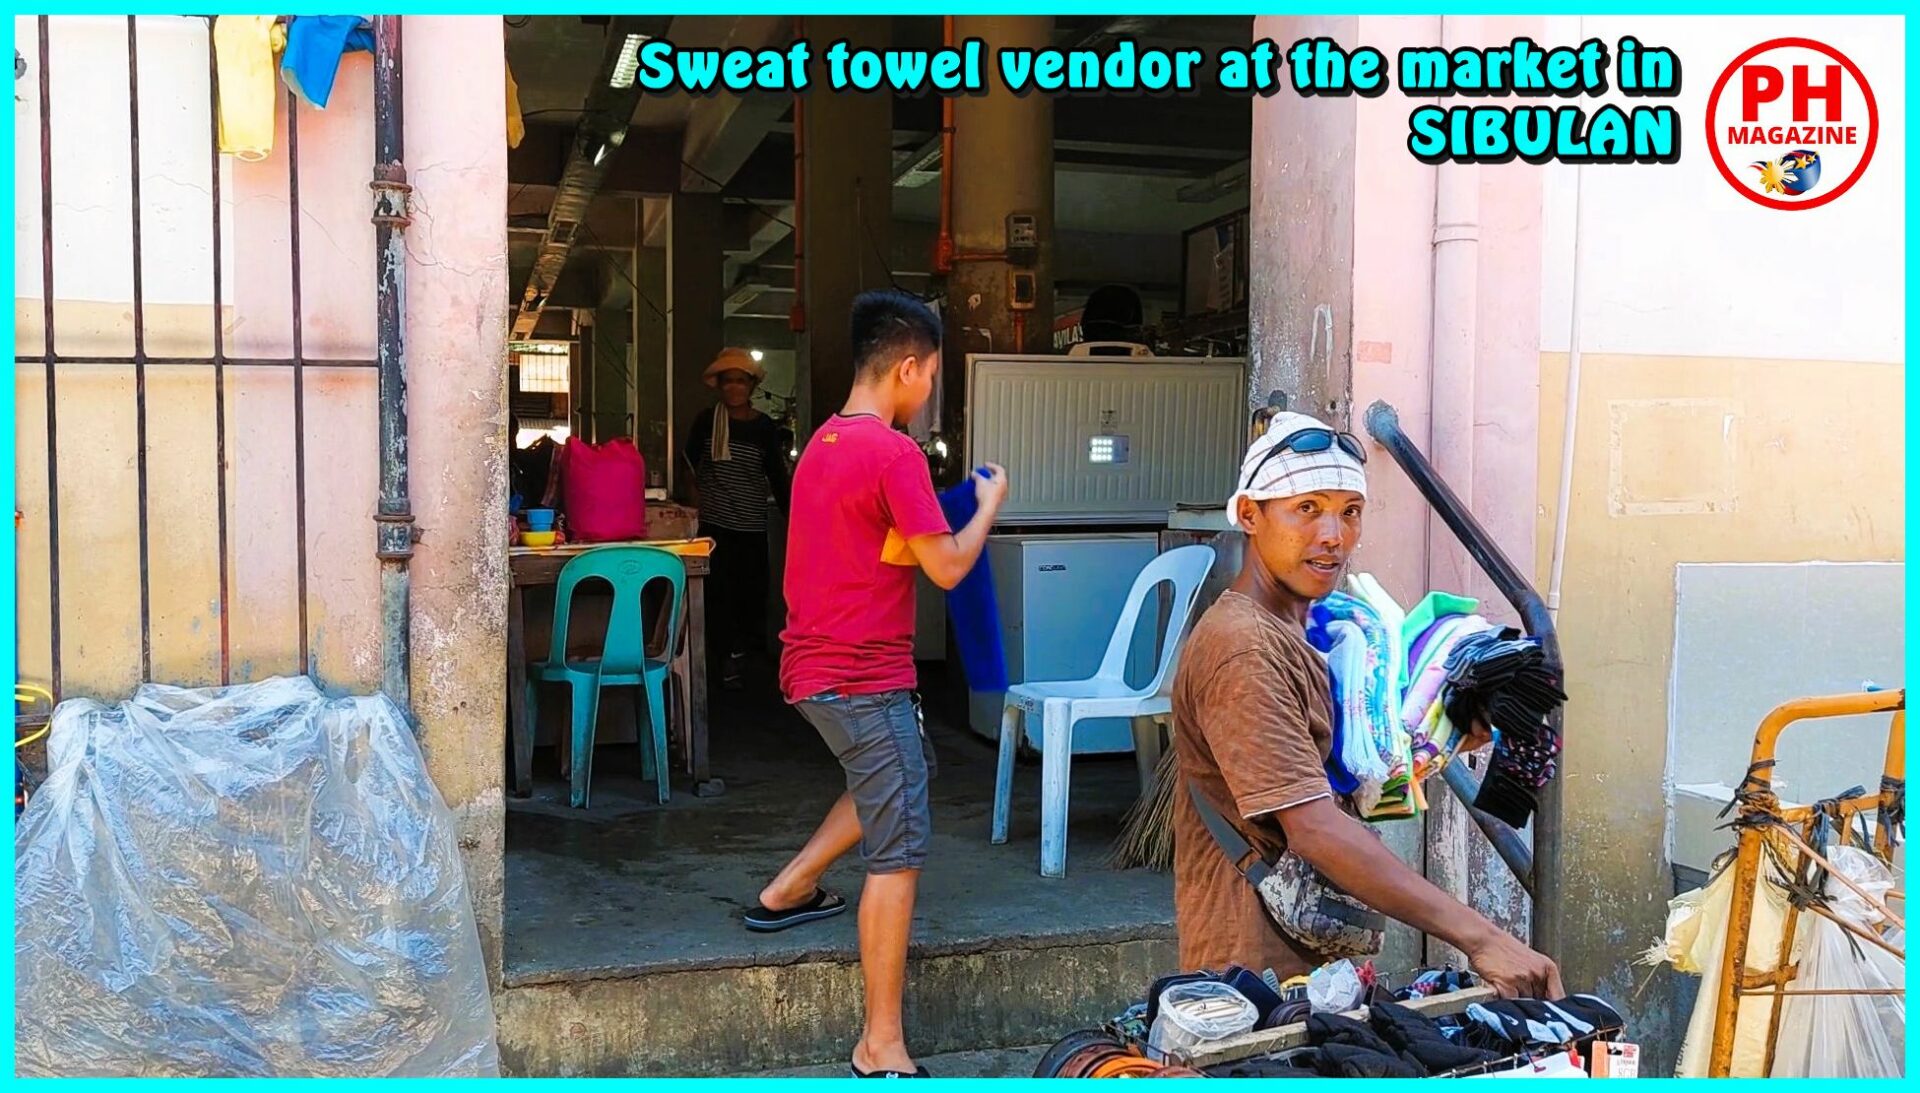 SIGHTS OF NEGROS - PHOTO OF THE DAY -Sweat towel vendor at market in Sibulan